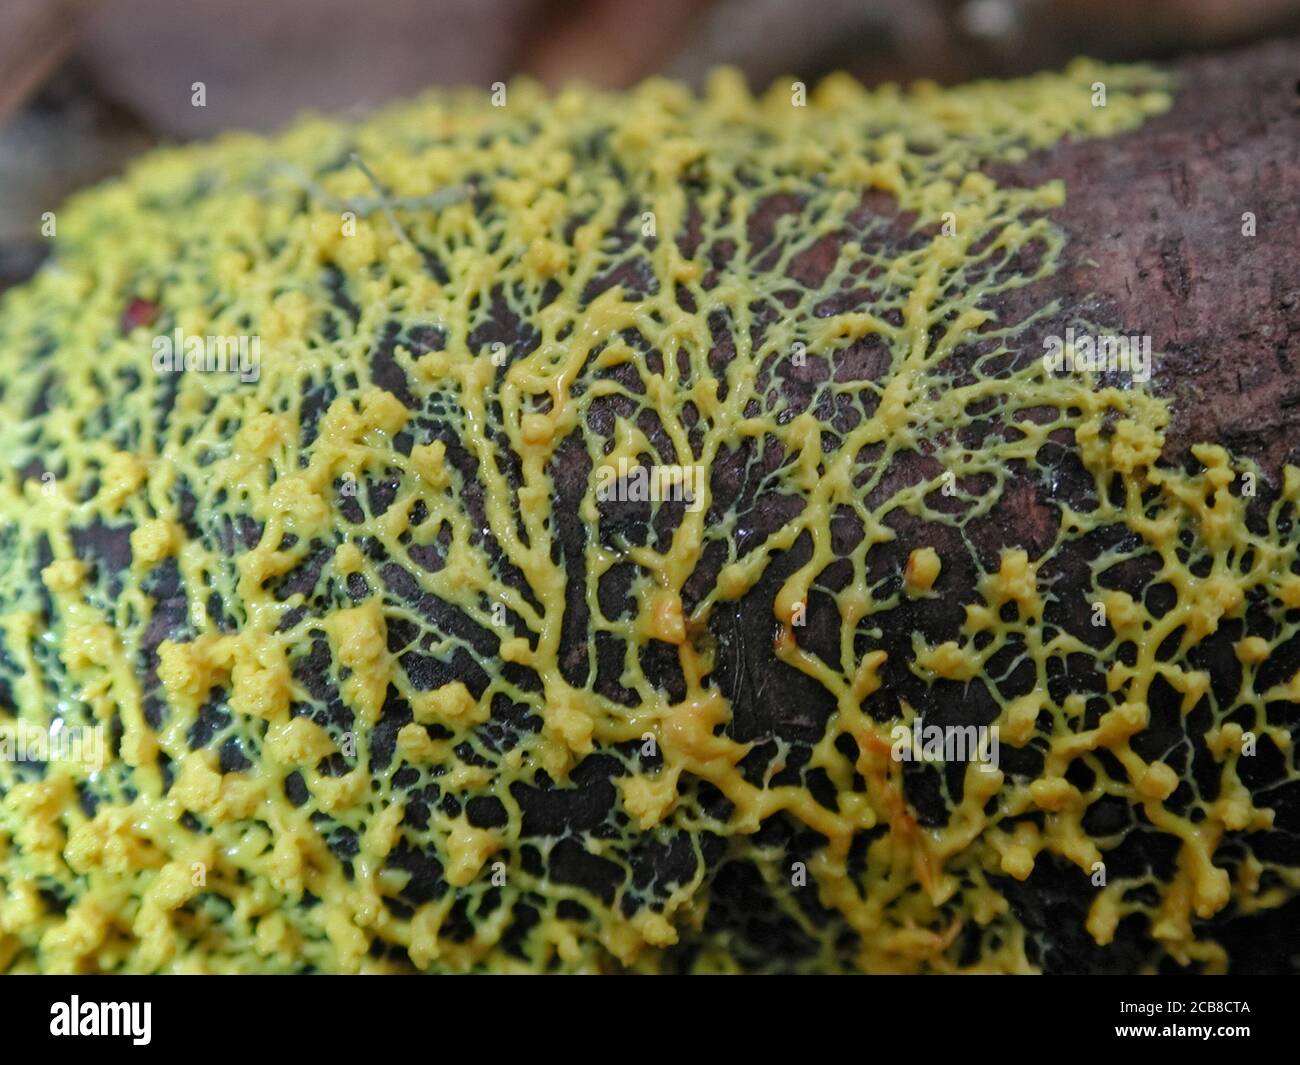 Scrambled Egg Slime are a form of fungi found in natural settings around the world.; This one is found in a forested area of North Central Florida. Stock Photo